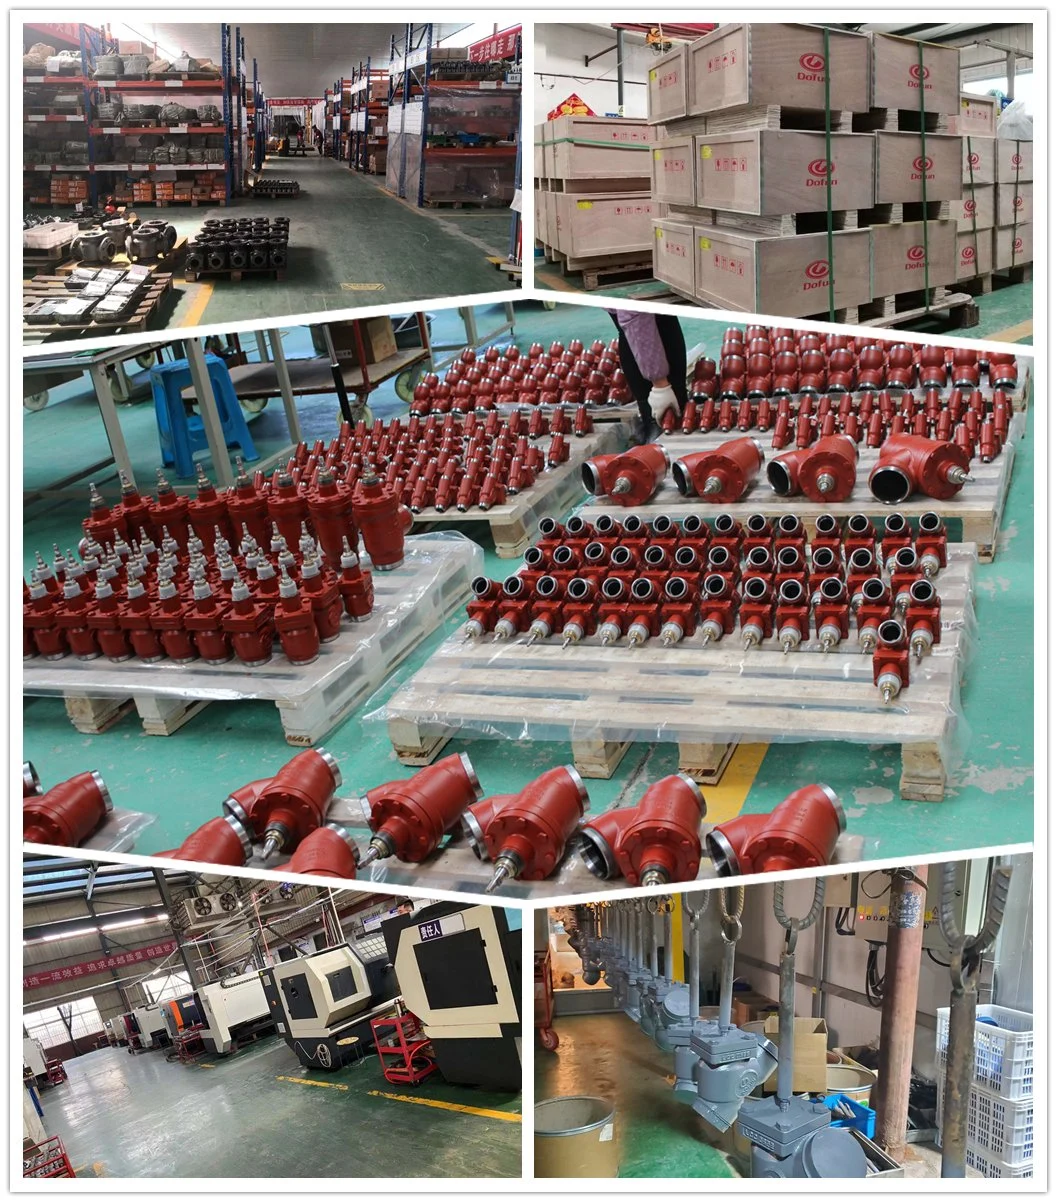 Industrial Refrigeration Cold Storage Connecting Ammonia Freon System Butt Welding Stop Valve Stop Check Valve